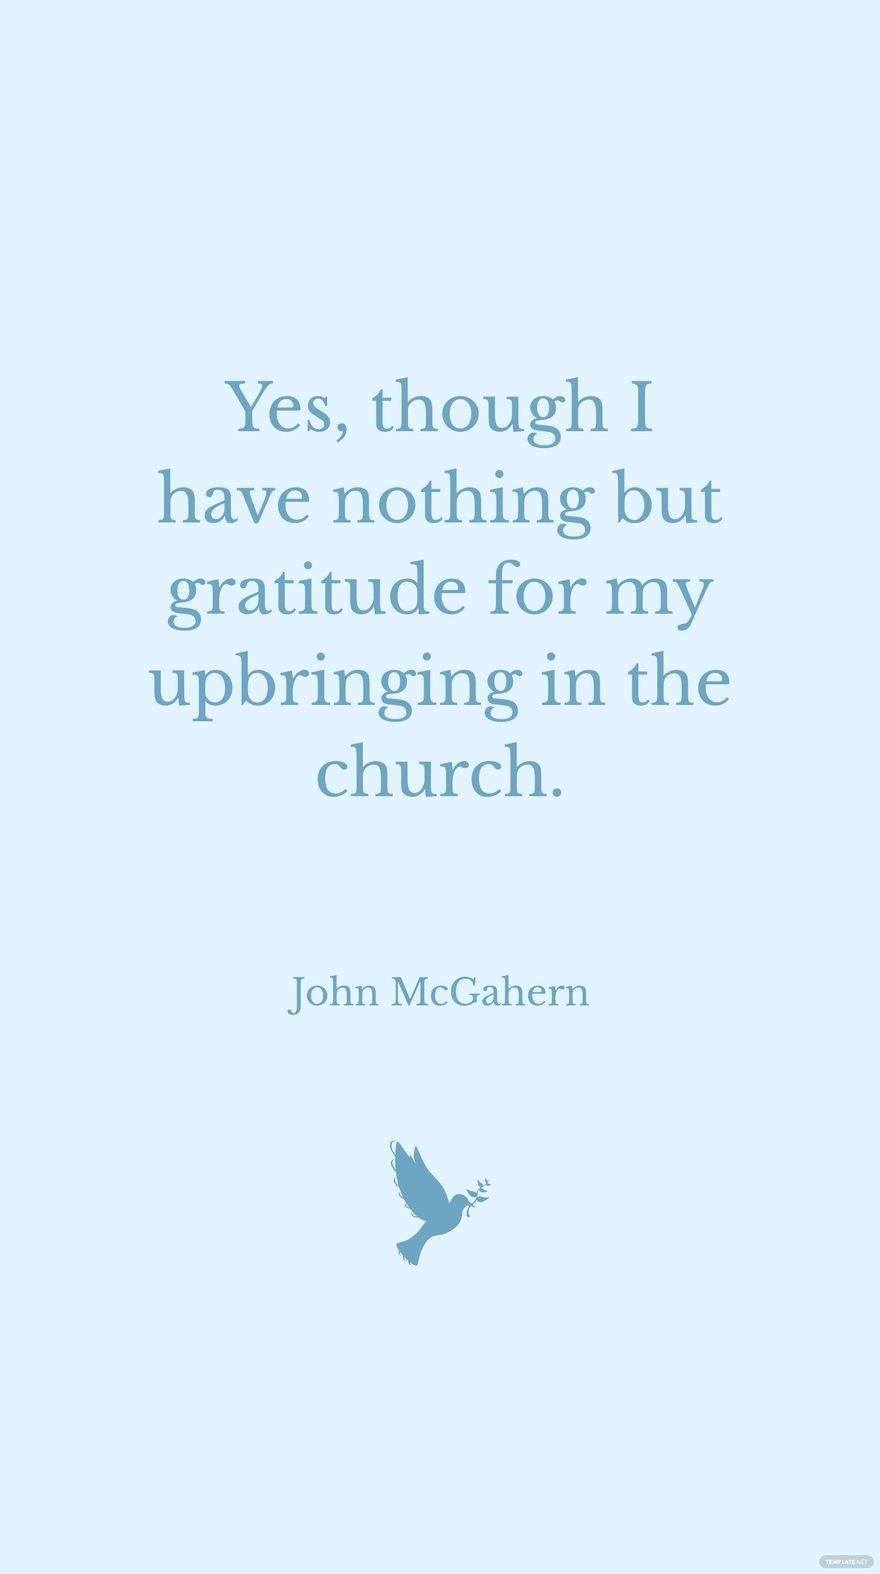 John McGahern - Yes, though I have nothing but gratitude for my upbringing in the church.